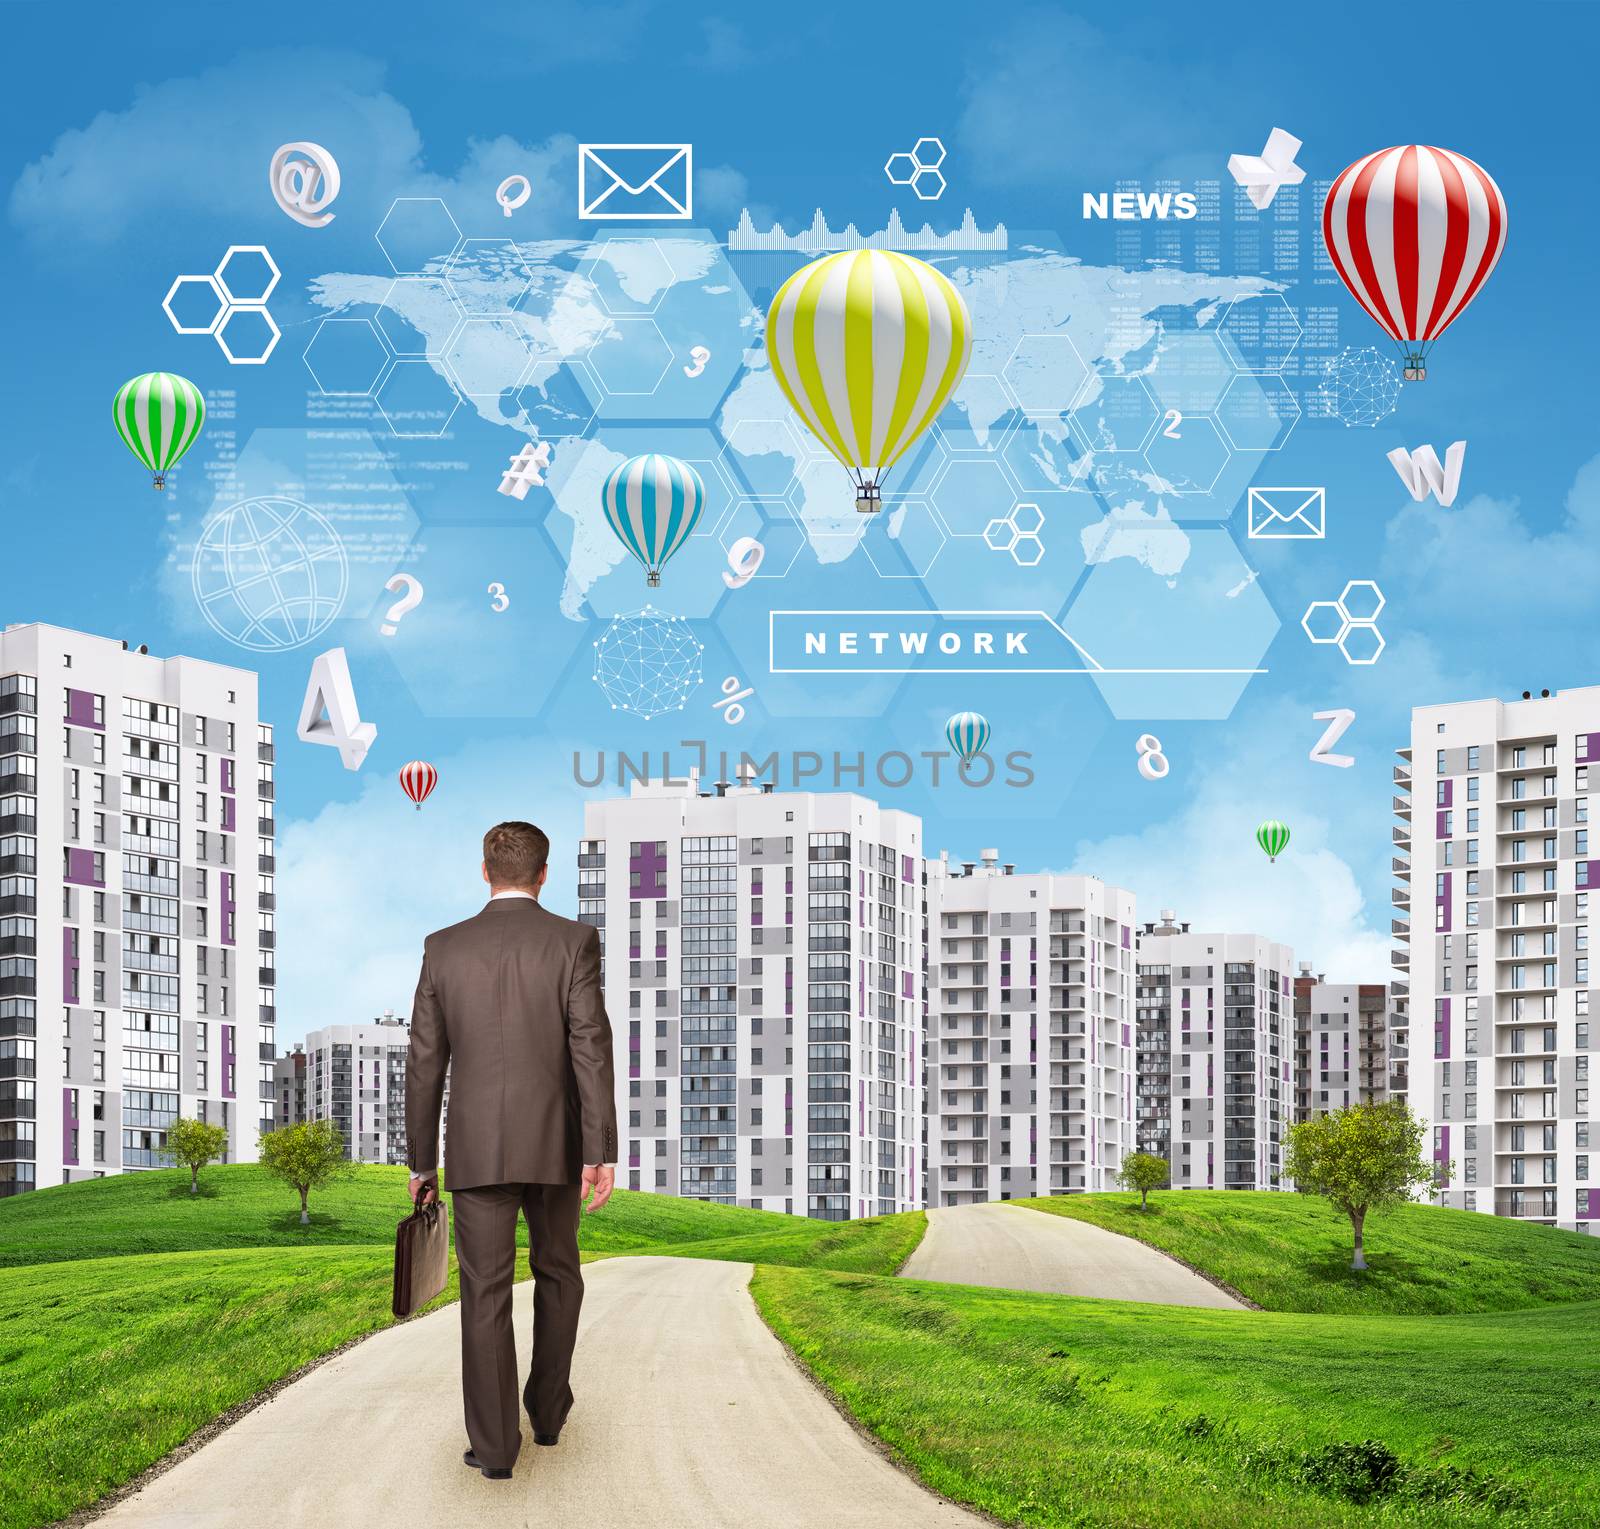 Businessman walking along road running through green hills with a few trees. High-rise buildings with a few air-baloons above as backdrop. Charts, hexagons and other virtual items in sky.